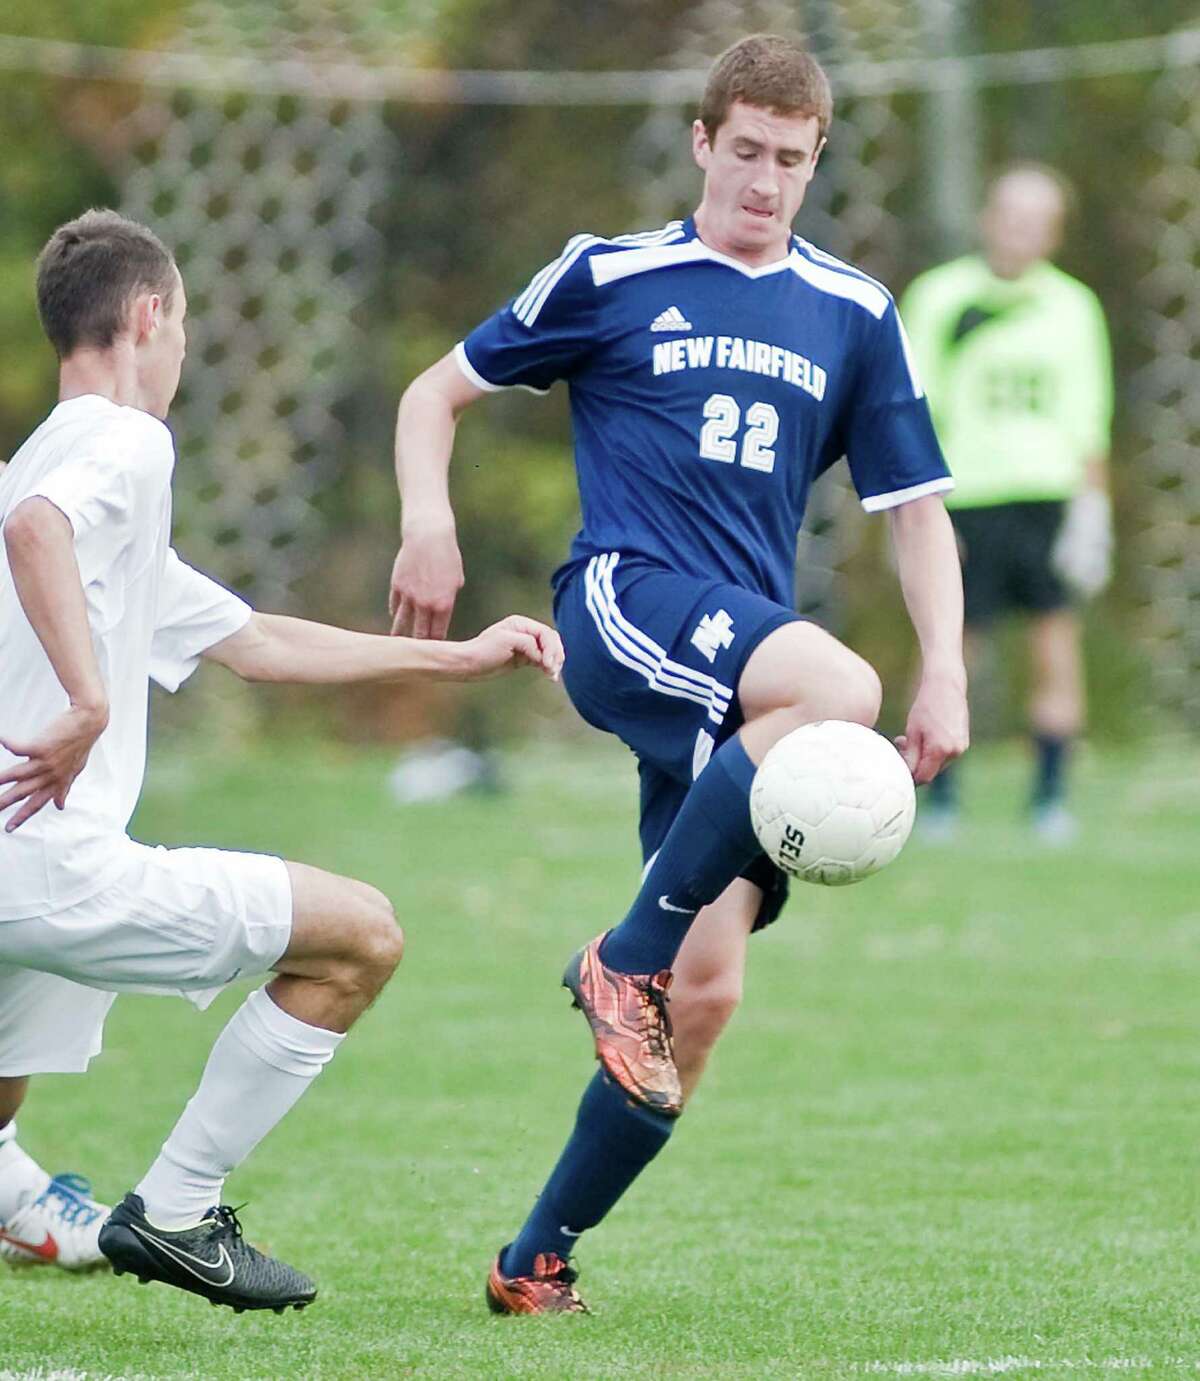 New Fairfield High School’s Liam Hanley tries to settle the ball during a game against Joel Barlow High School, played at Barlow. Oct. 22, 2015